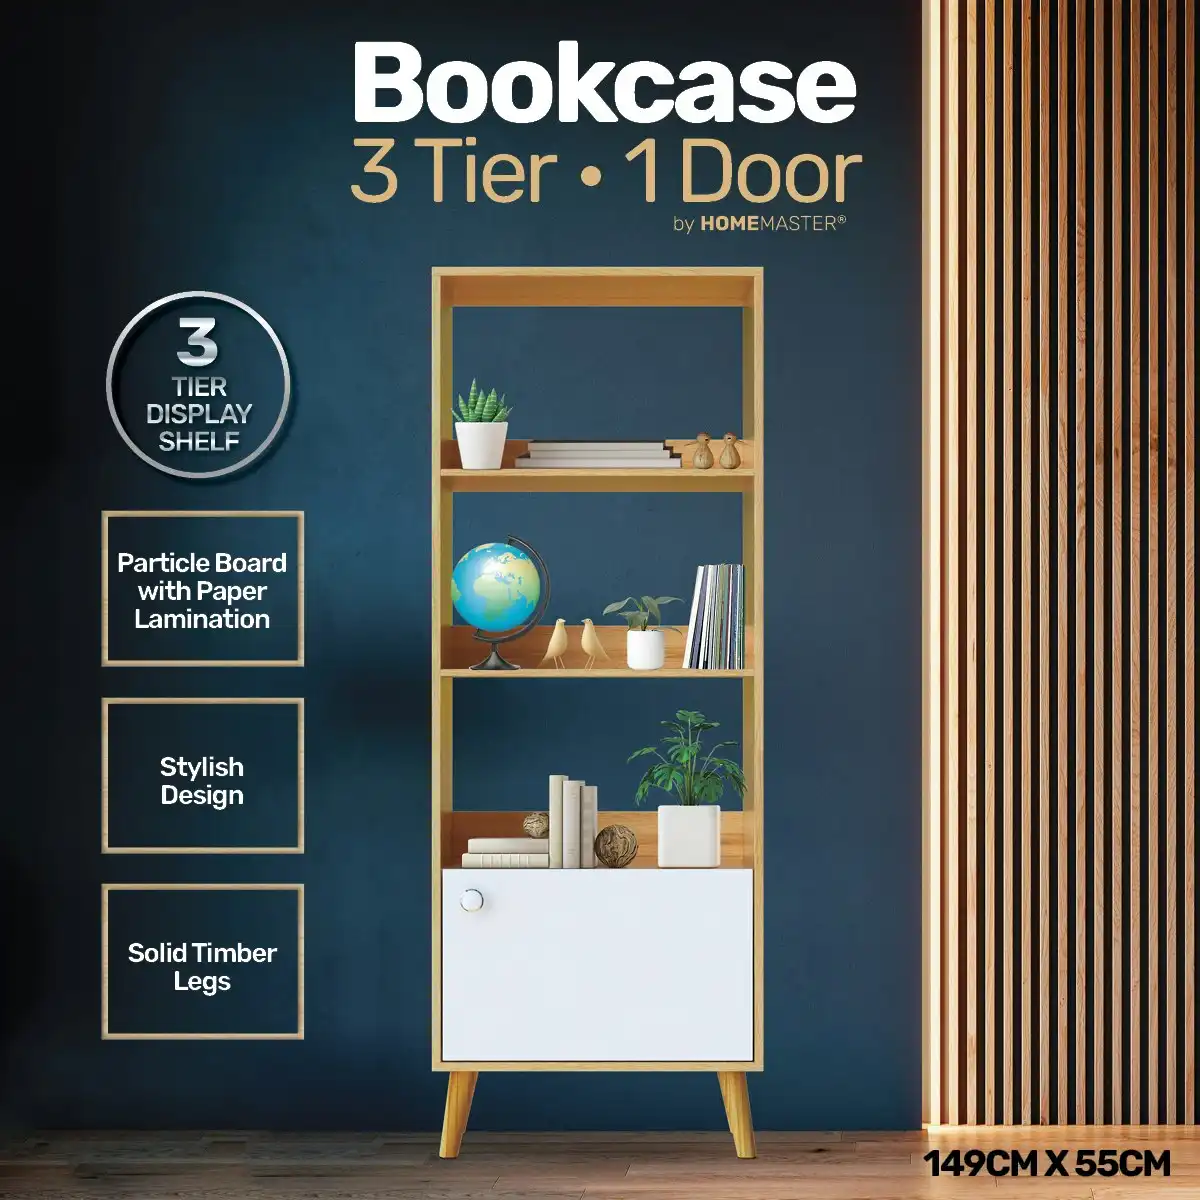 Home Master 3 Tier Bookcase & Storage Two Tone Flawless Design 55 x 149cm